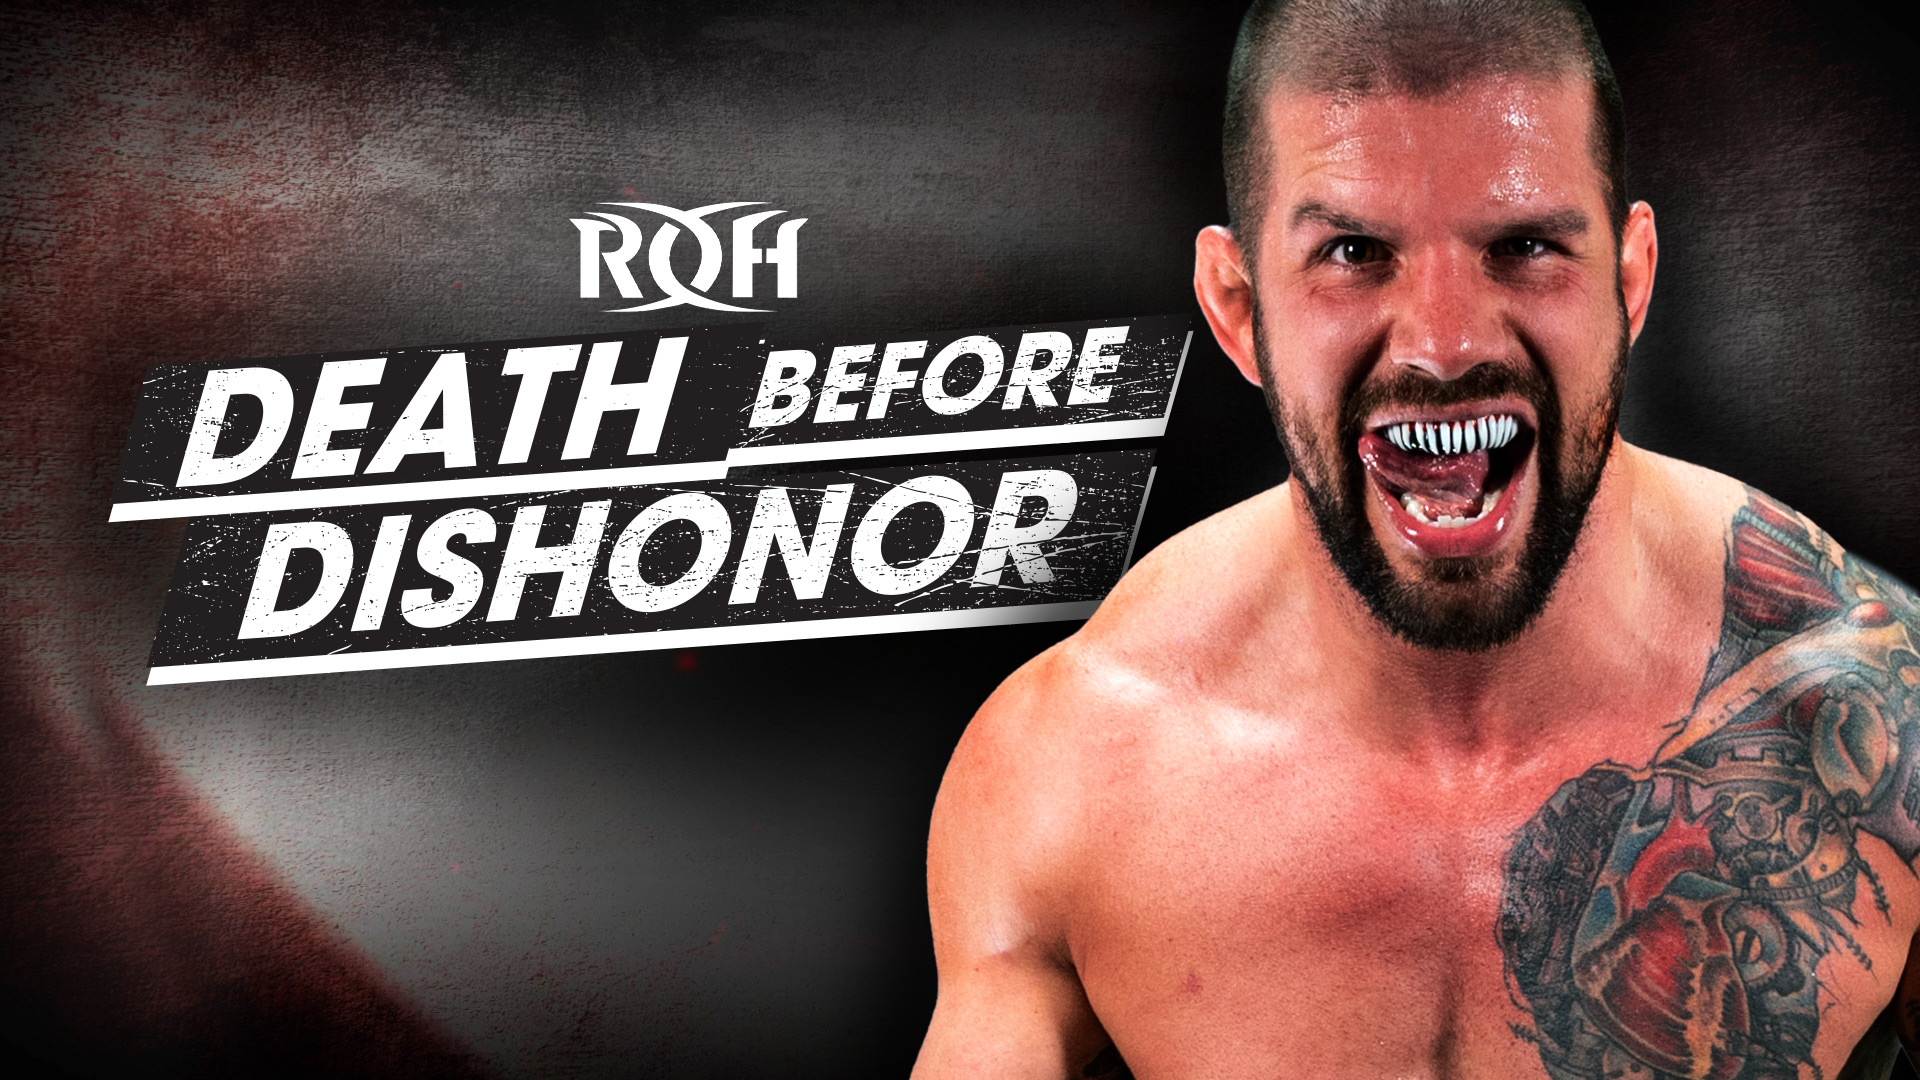 Josh Woods To Challenge For Pure Title at ROH Death Before Dishonor